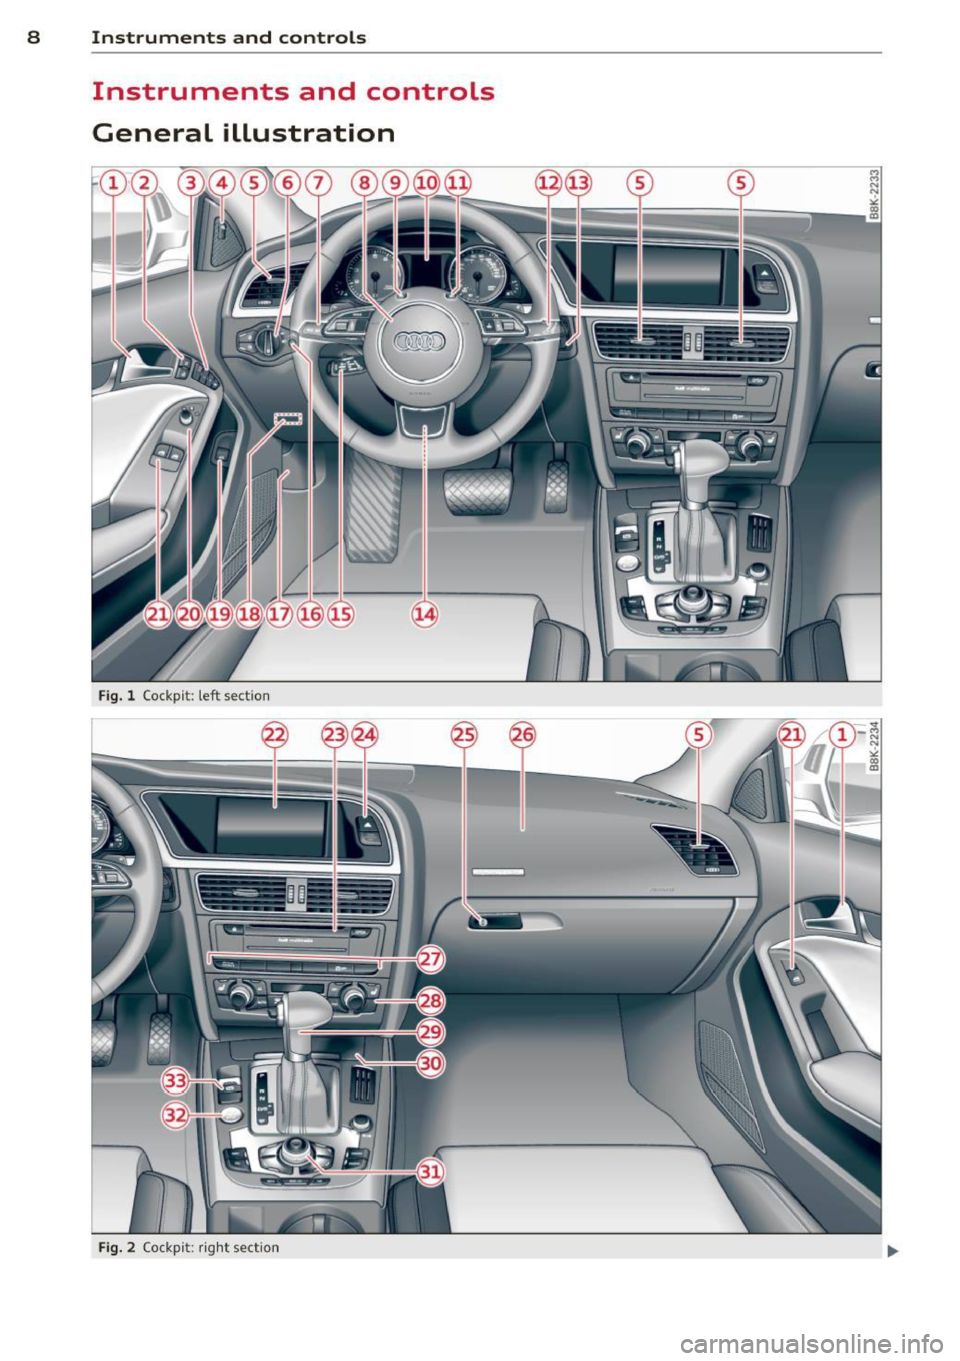 AUDI A5 COUPE 2014  Owners Manual 8  Instruments and controls 
Instruments  and  controls 
General  illustration 
Fig. l Cockp it:  left  sect io n 
---=- ---1 =----- -
- --
- --
Fig. 2 Cock pi t: ri ght  sect io n  